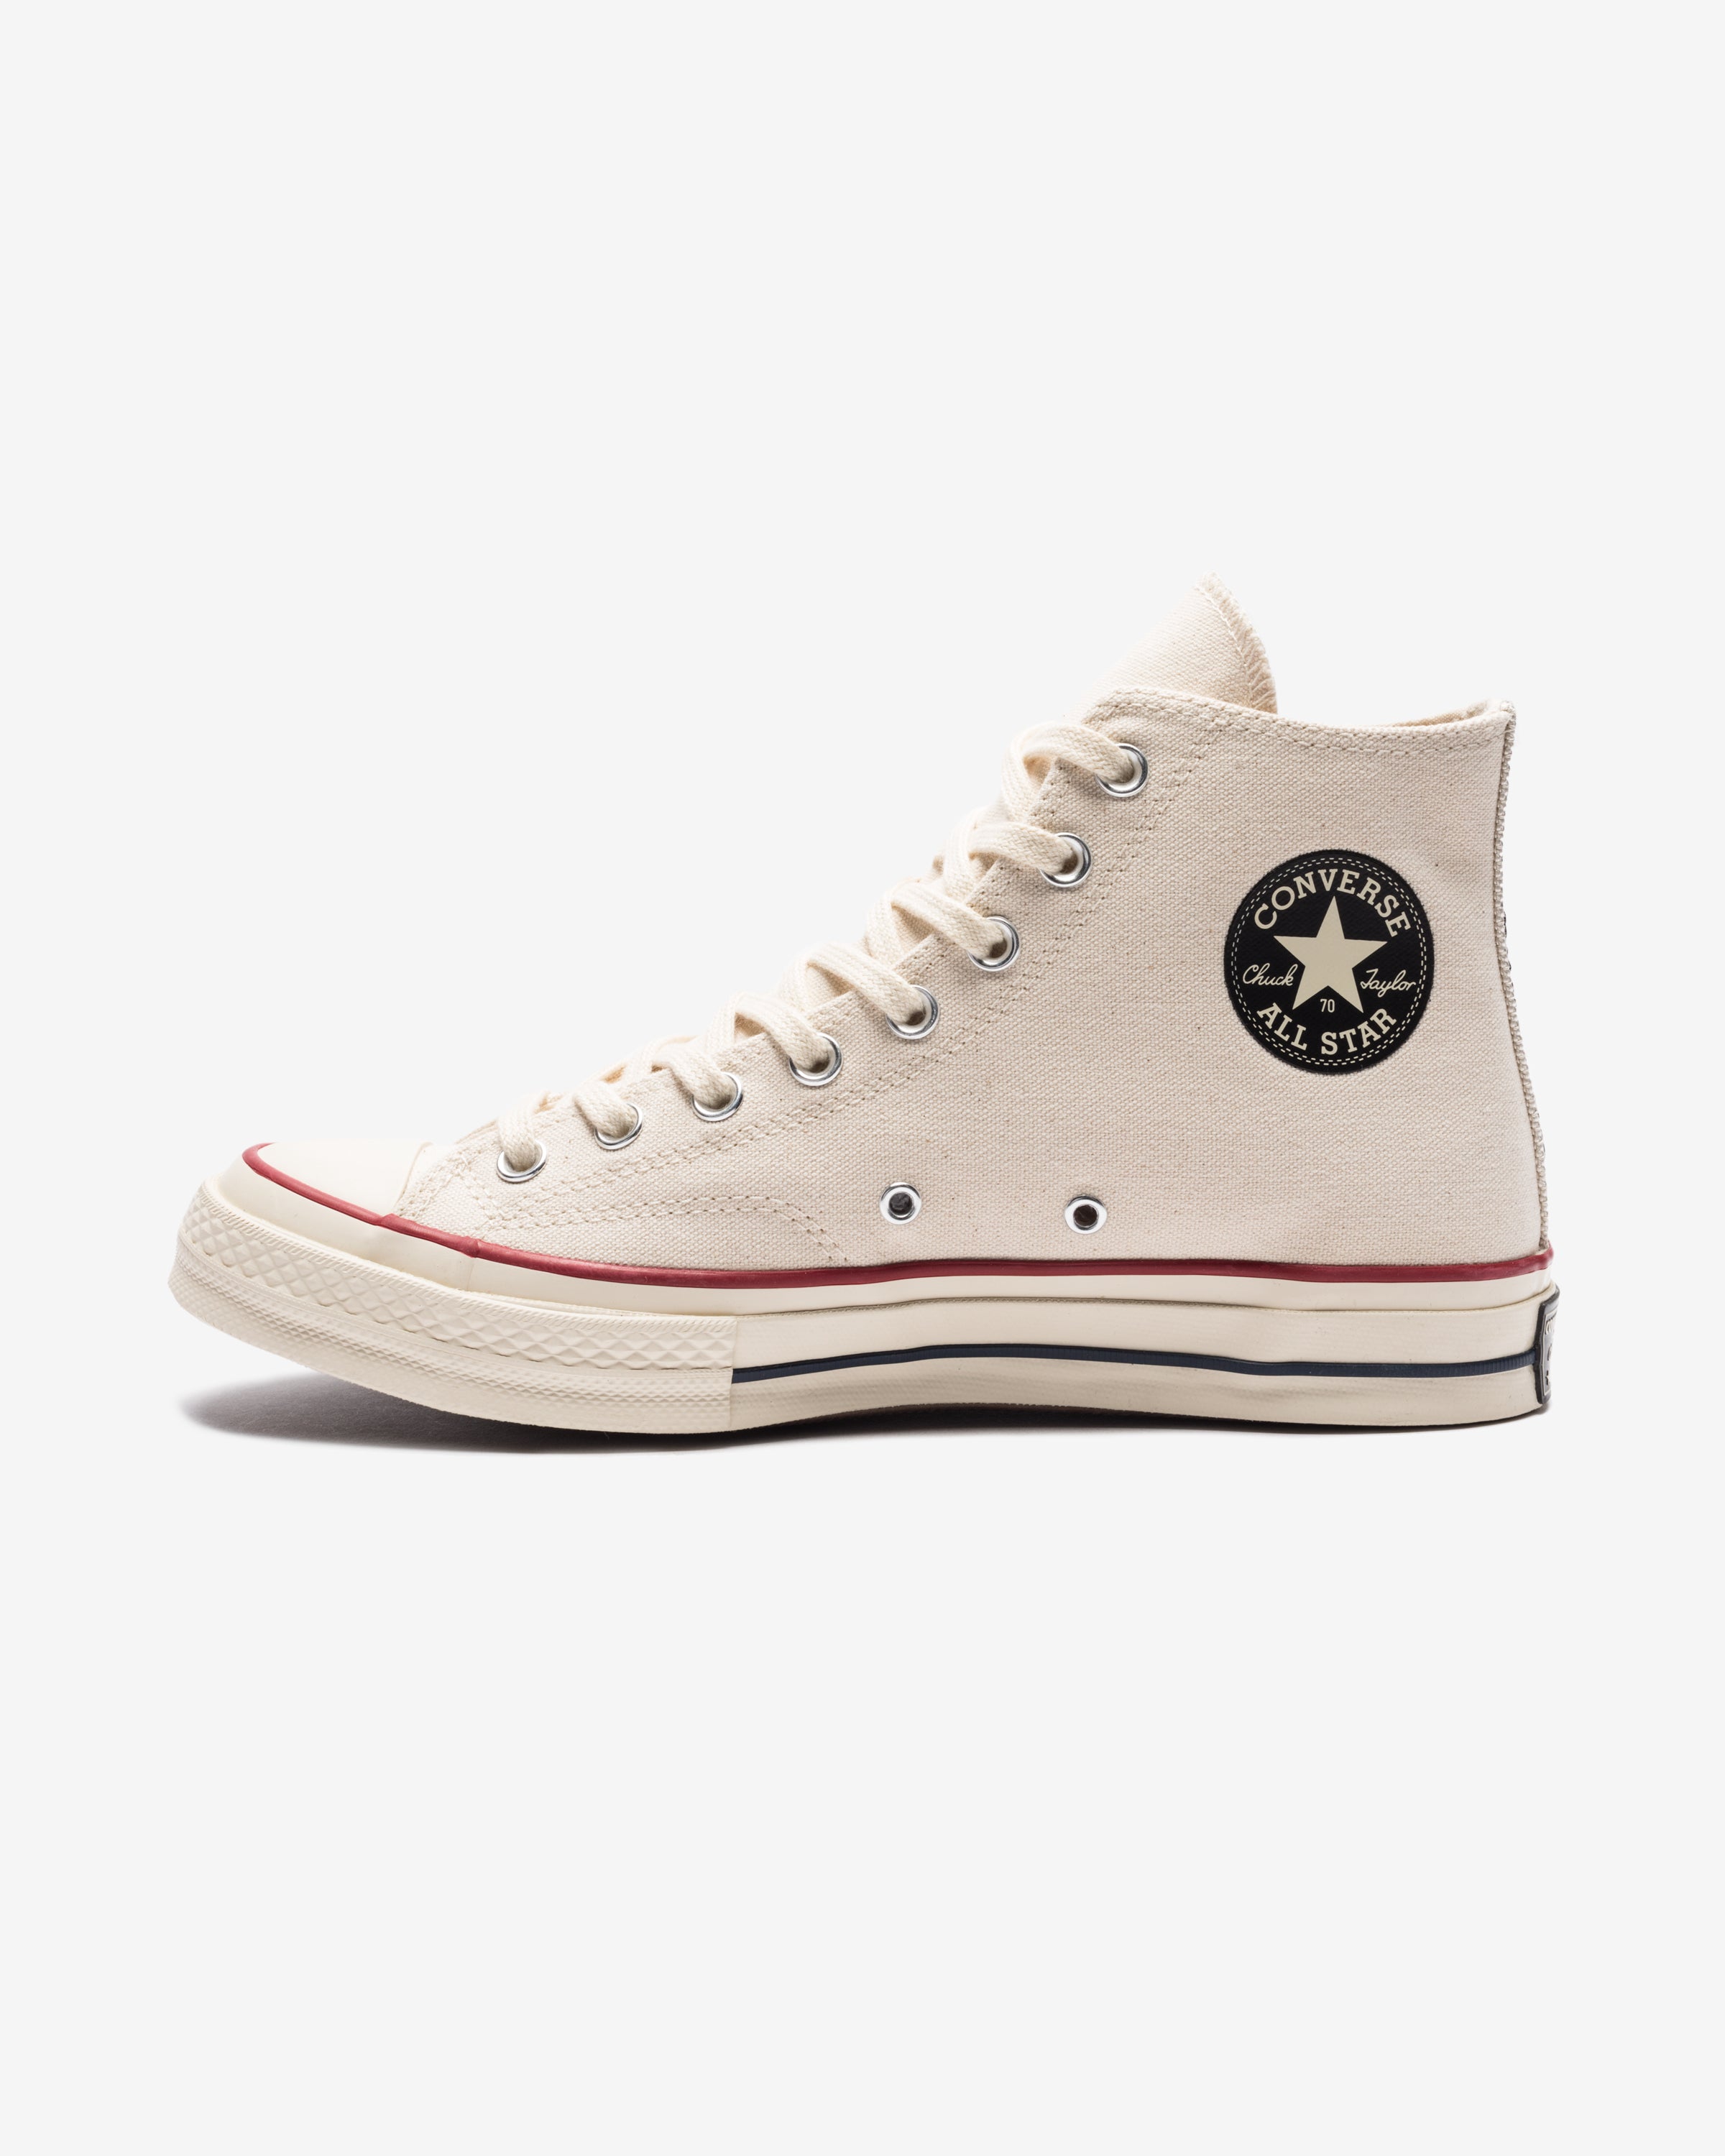 Converse X Undefeated Chuck 70 Hi Natural Fieryred Undefeated 